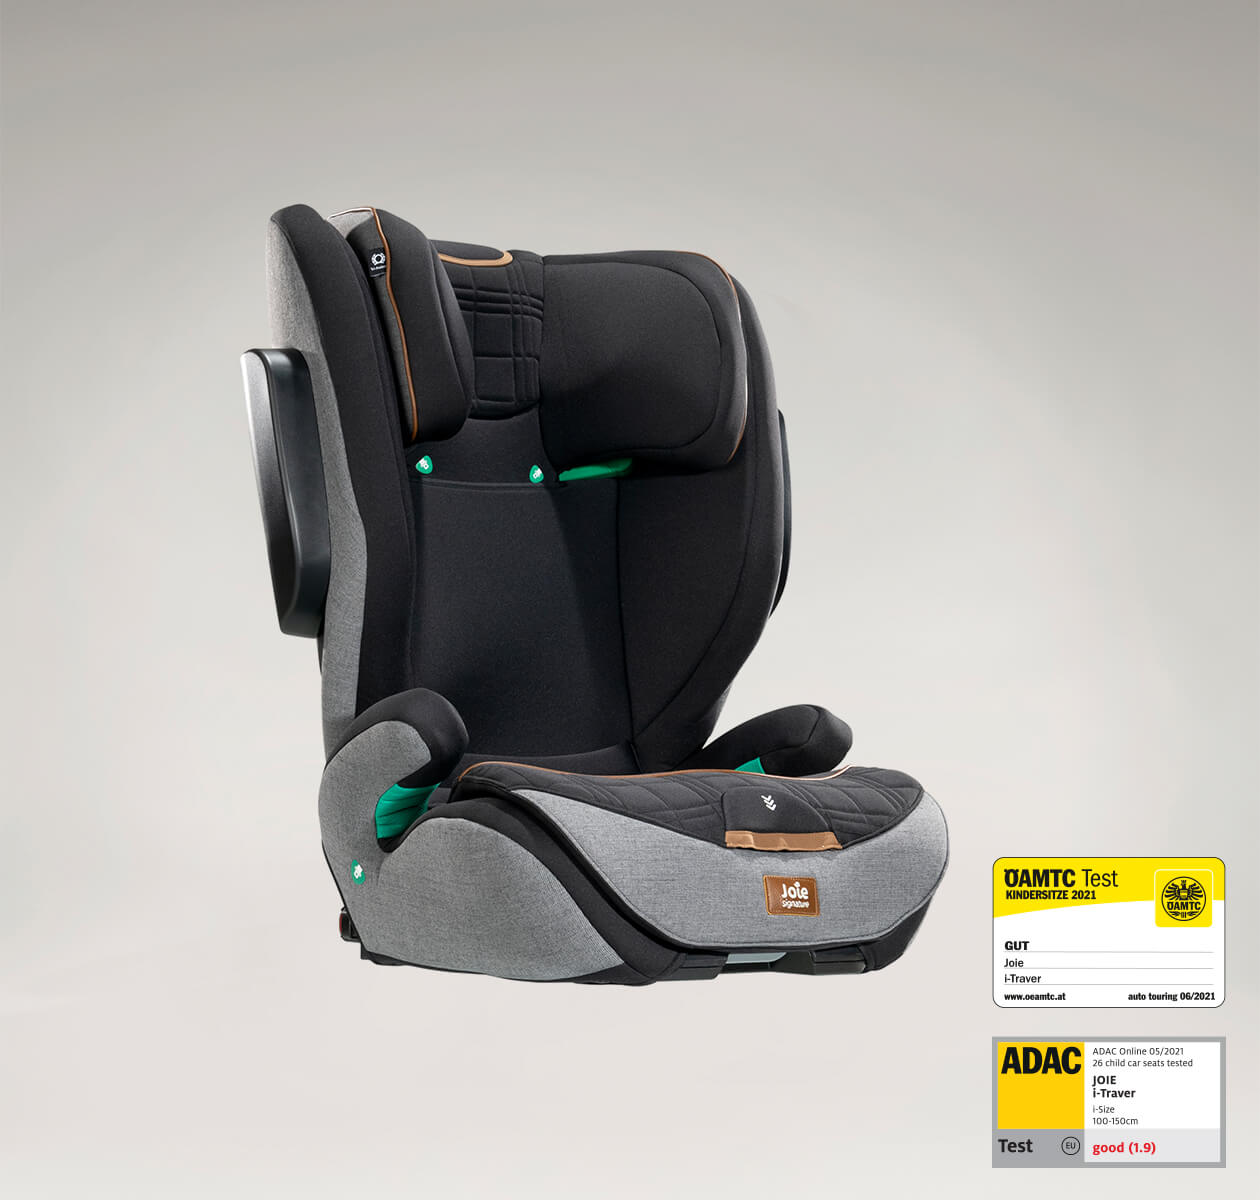 Joie Signature i-Traver i-Size Booster Seat | With ISOFIX Install